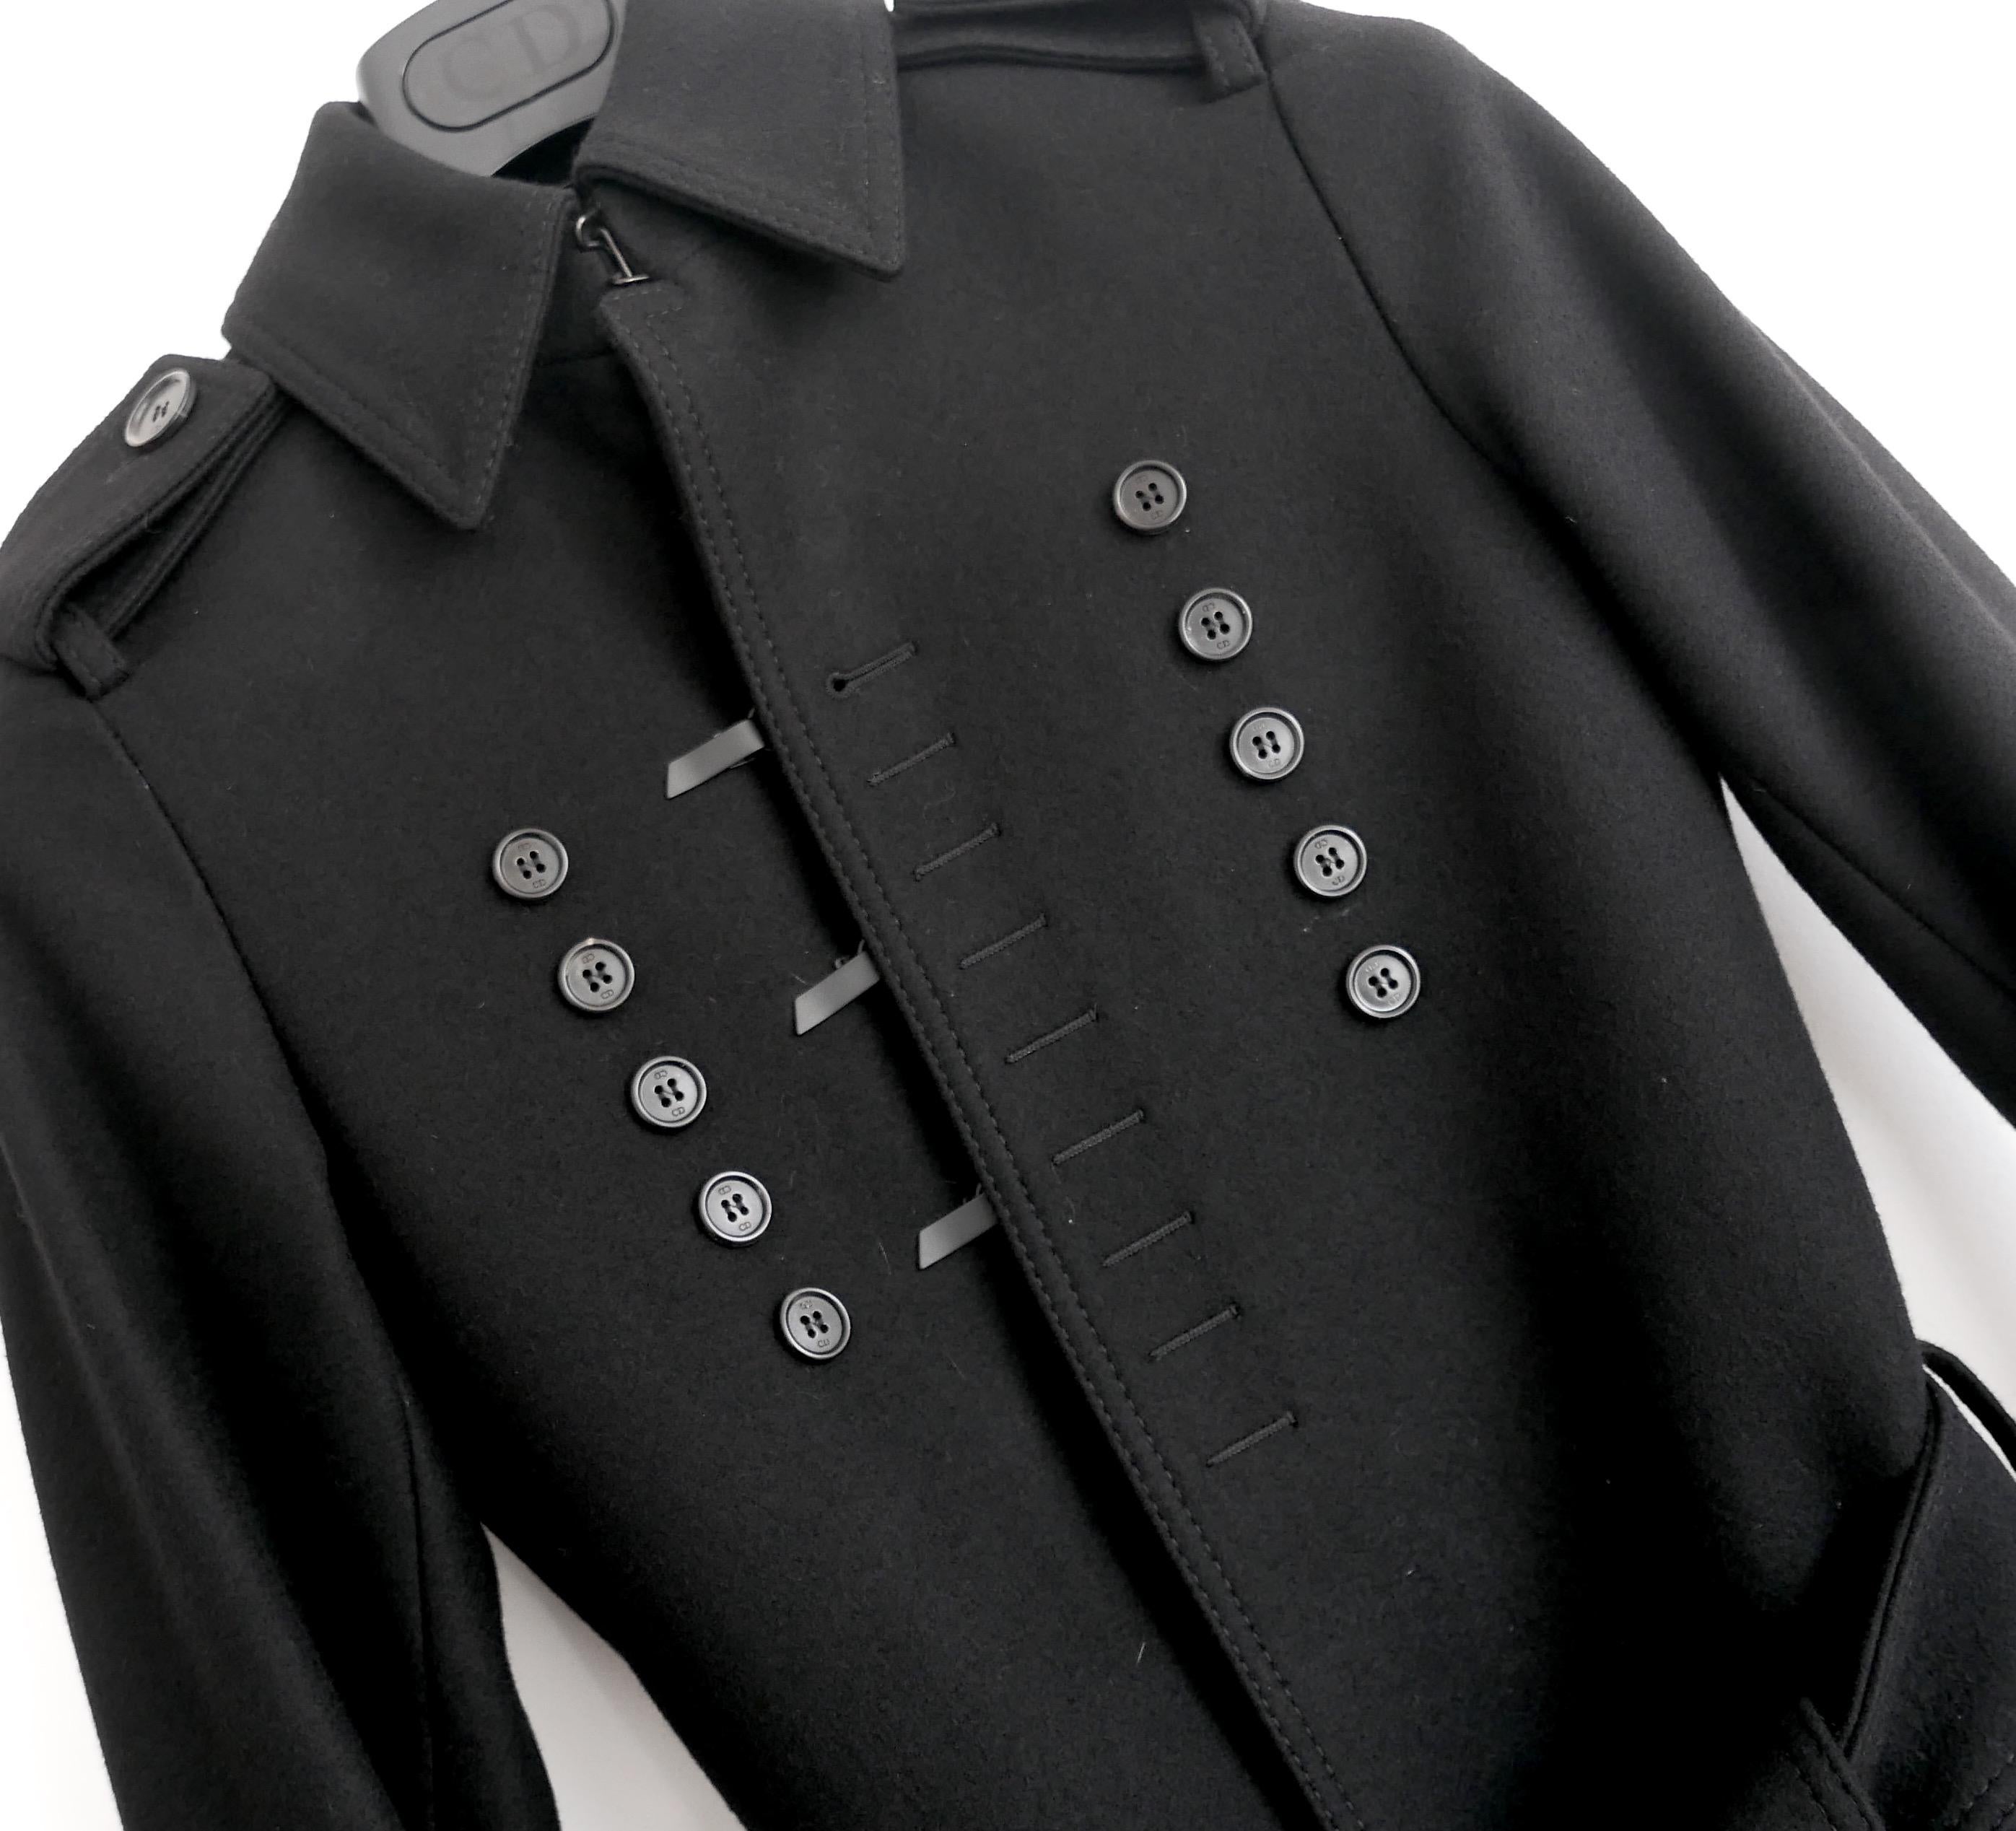 Ultra rare archival Dior Homme trench coat from Hedi Slimane’s Fall 2006 Collection. Worn a couple of times and then carefully stored. Comes with CD hanger. Made from thick black wool with a black twill and striped sleeve lining. It has a sleek